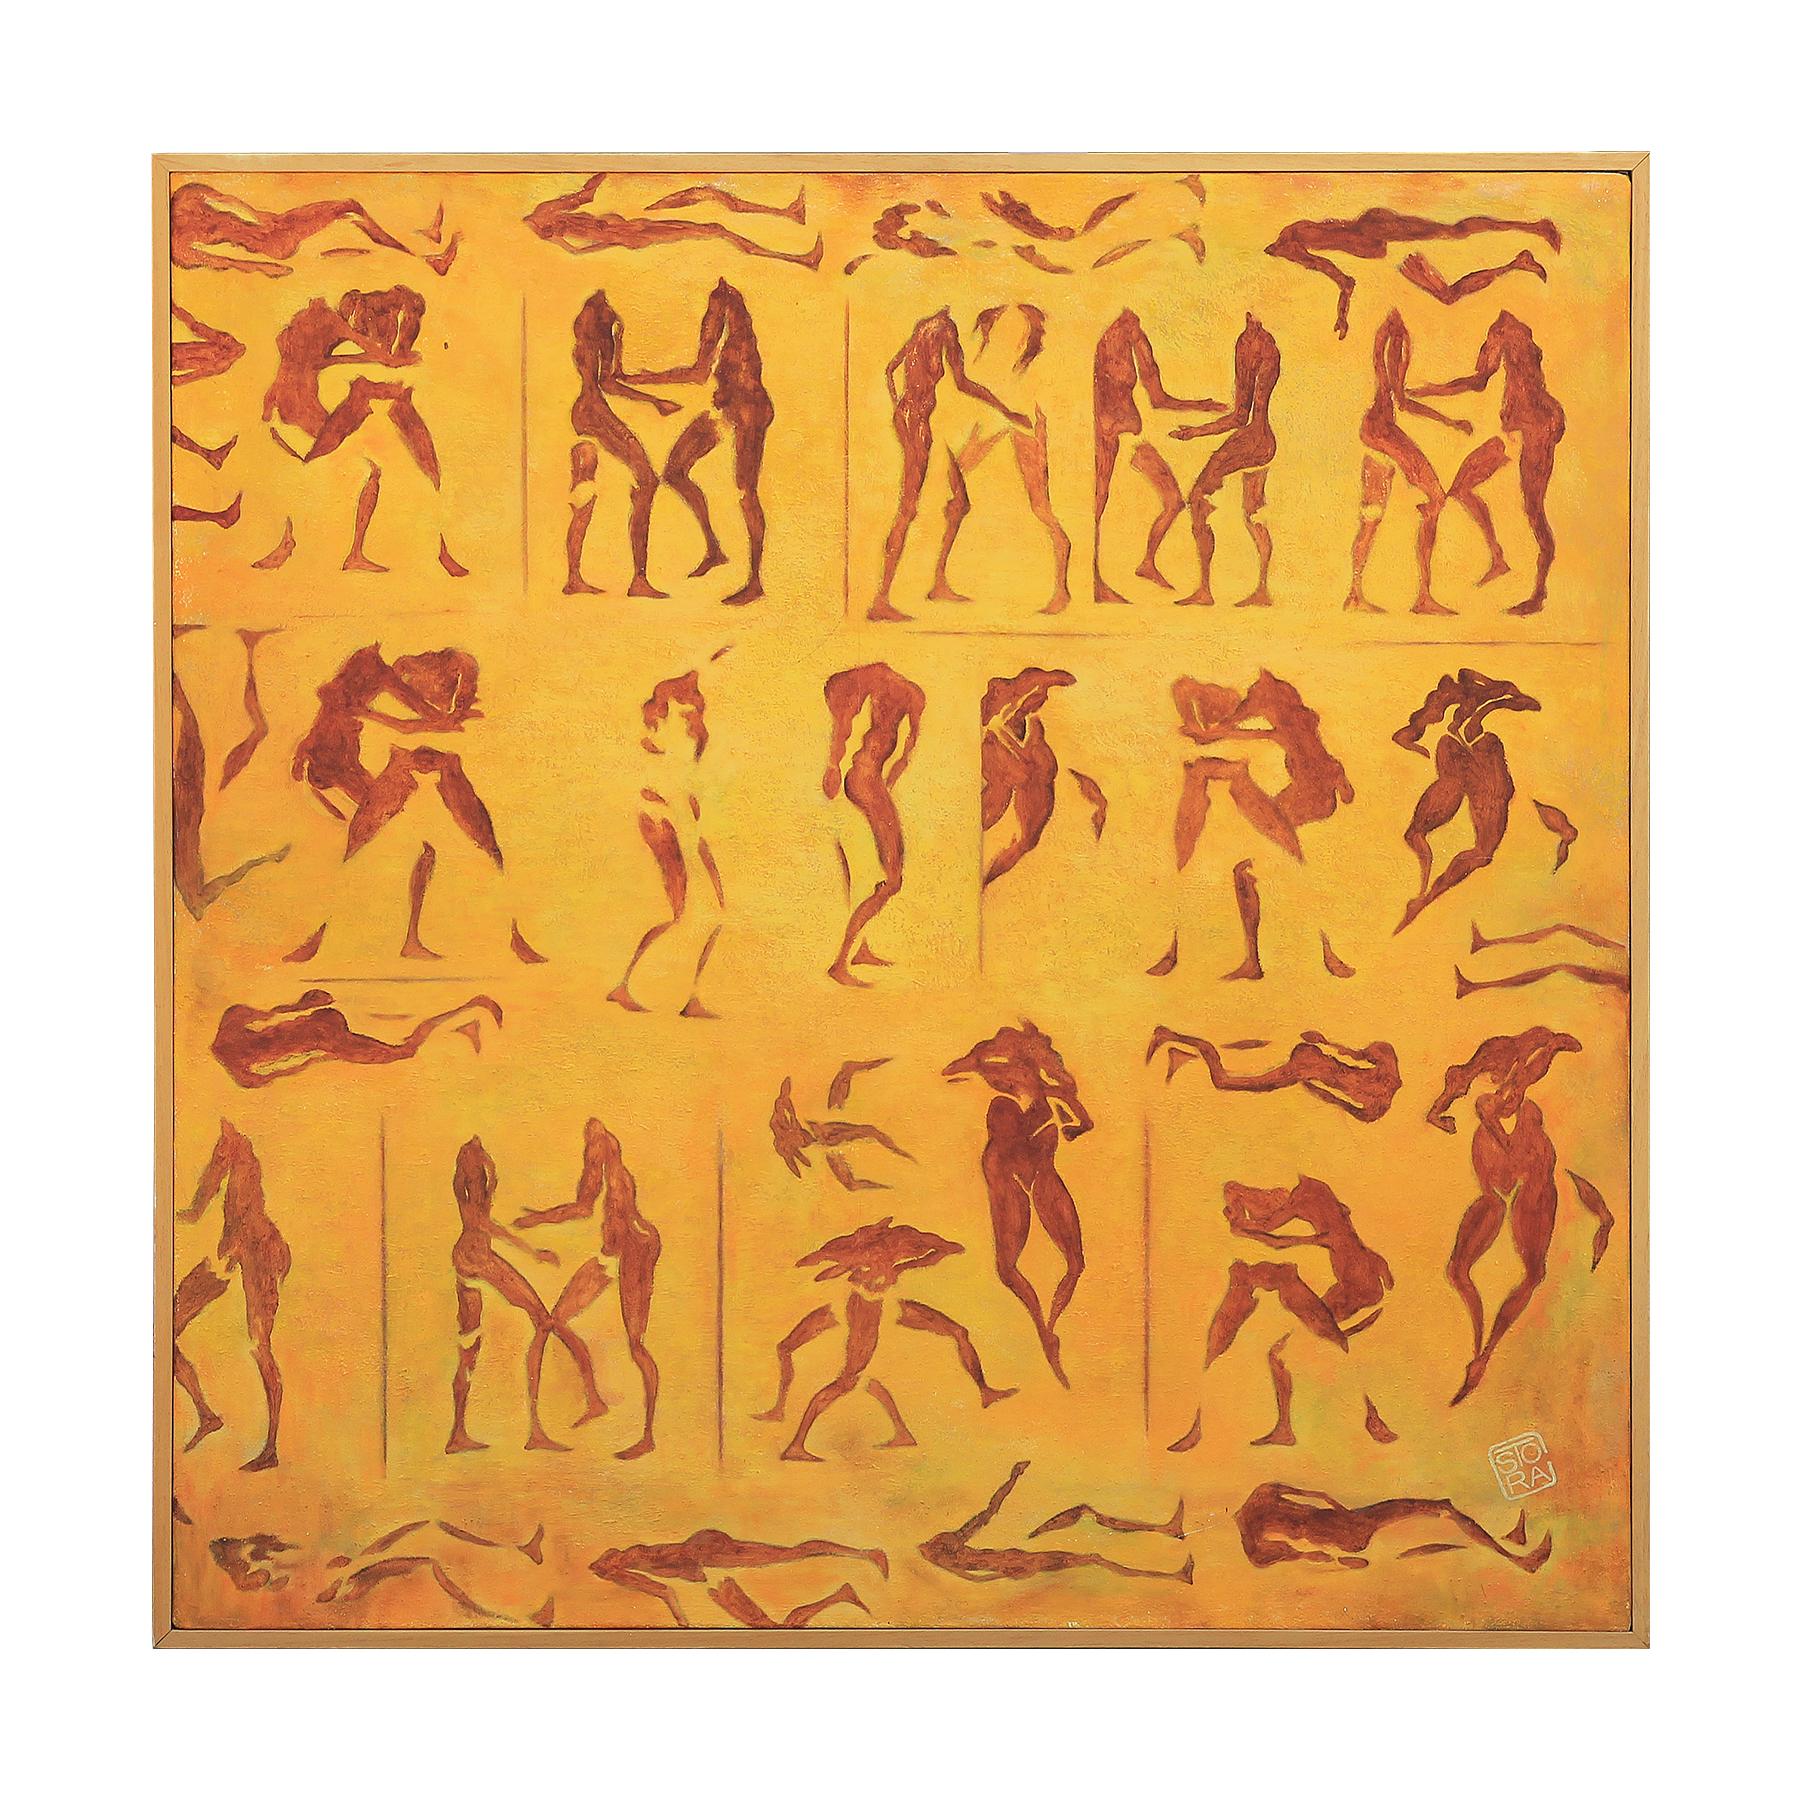 Abstract Yellow and Orange Toned Figurative Grid of Nude Bodies Painting